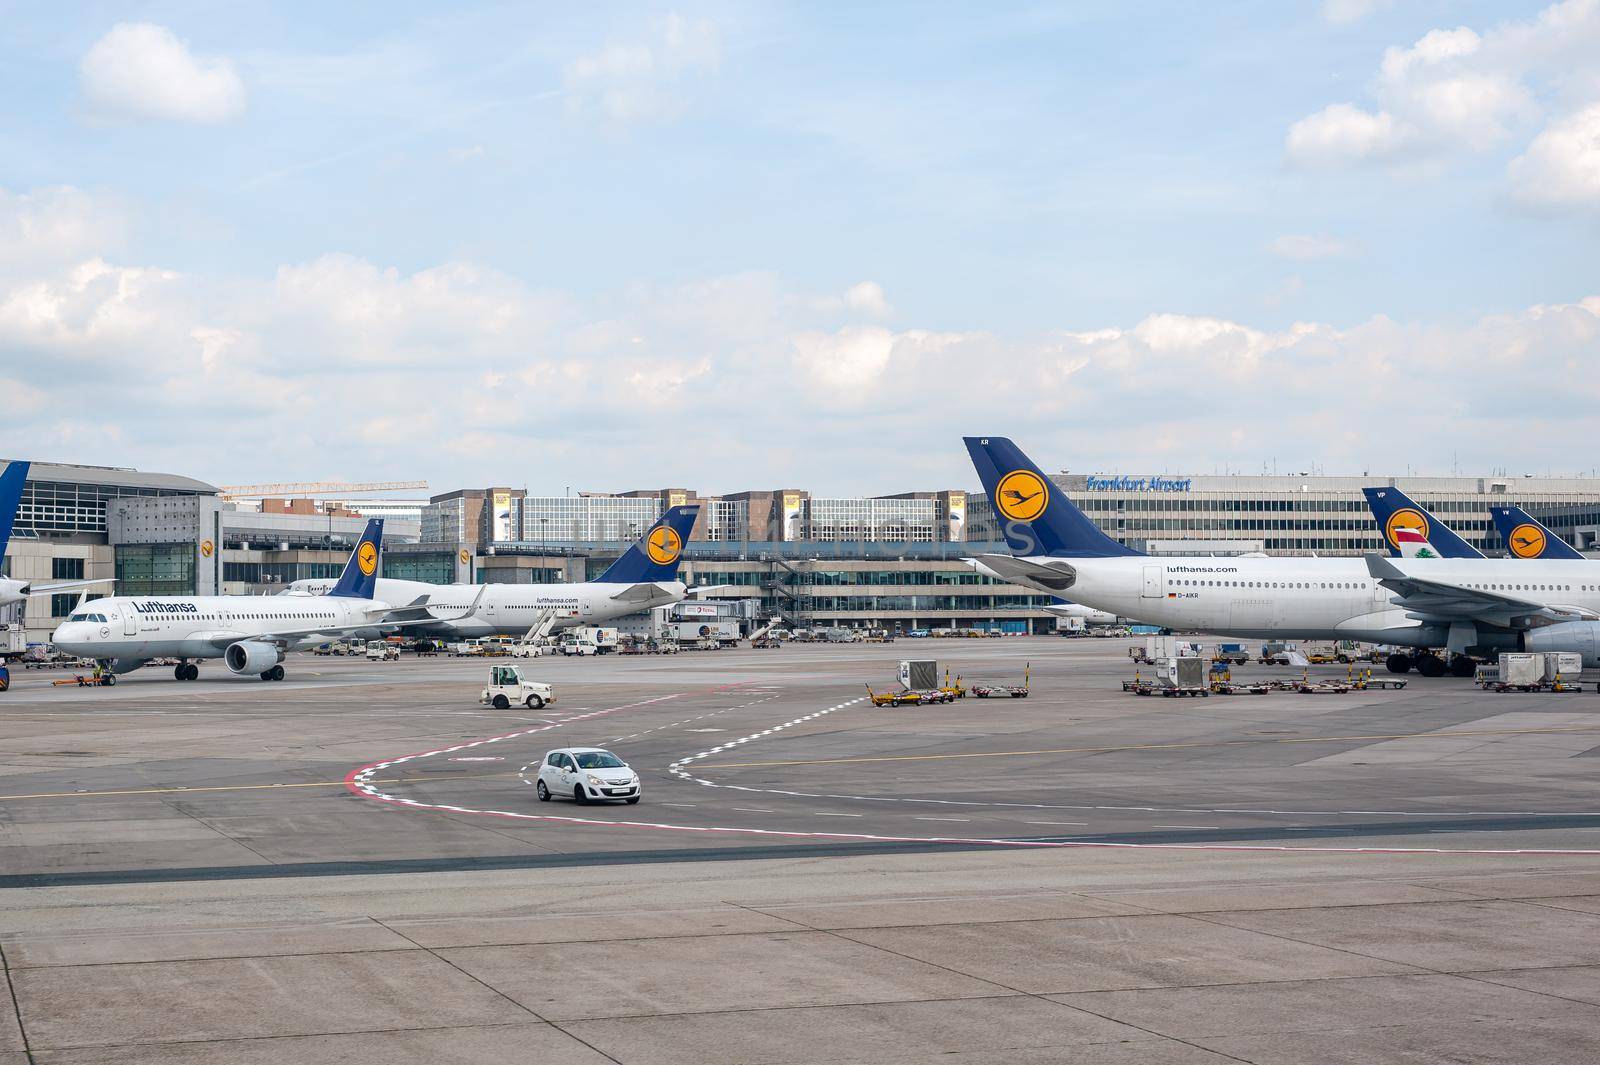 05/26/2019 Frankfurt Airport, Germany. Operated by Fraport and serves as the main hub for Lufthansa including Lufthansa CityLine and Lufthansa Cargo. Frankfurt Airport is the busiest airport by passenger traffic in Germany as well as the 4th busiest in Eur by Qba